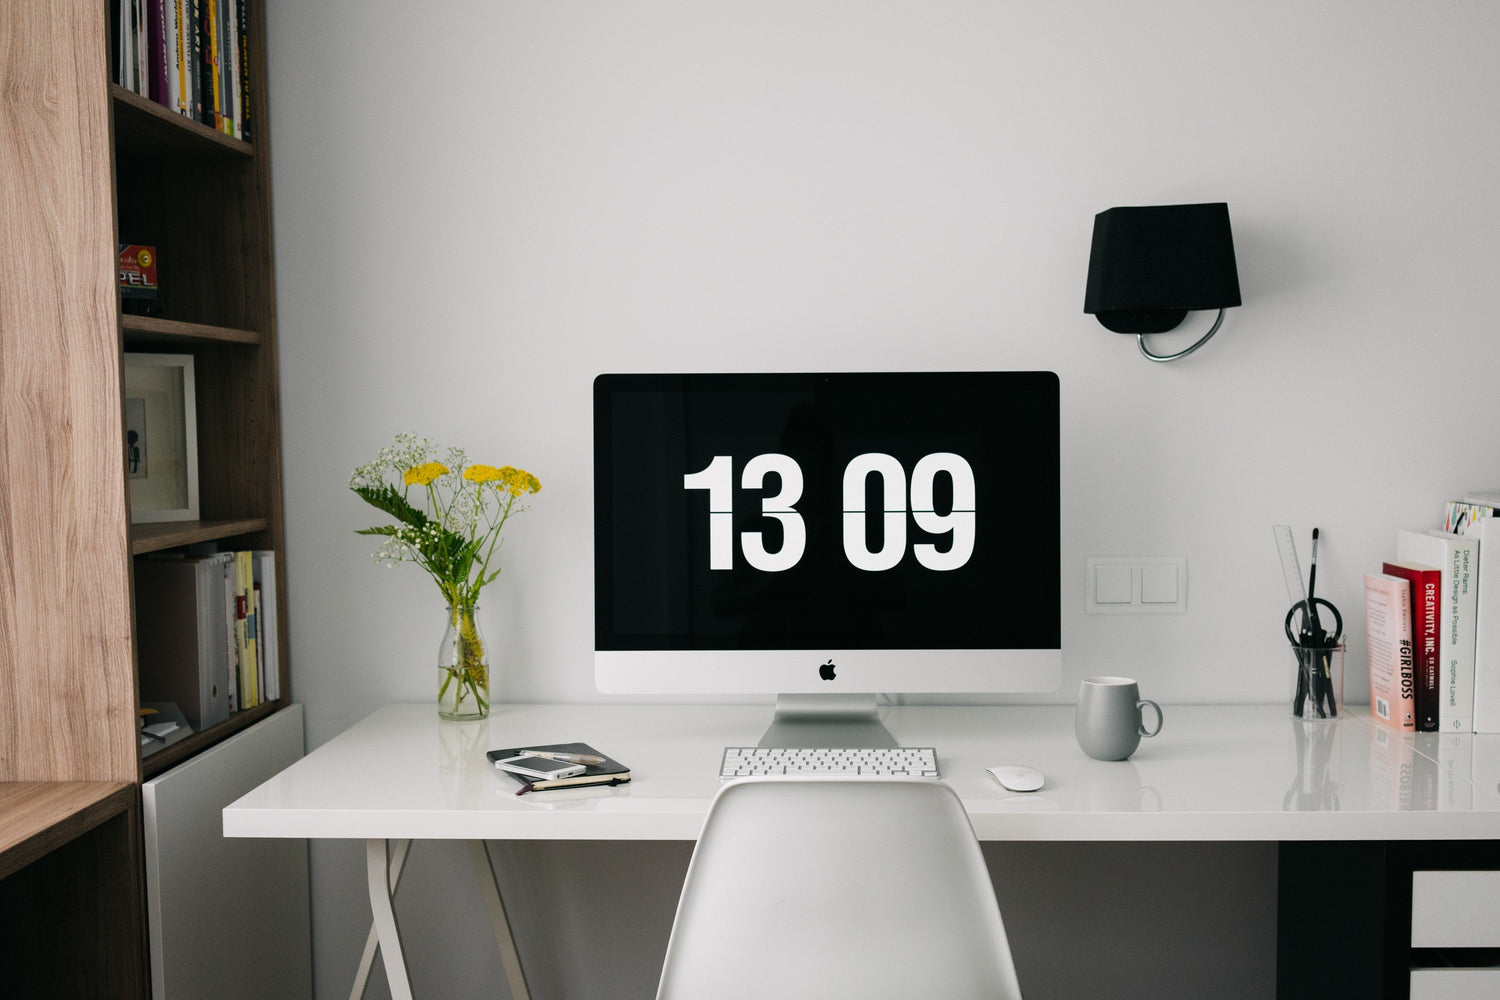 5 Working From Home Essentials For Better Health and More Time